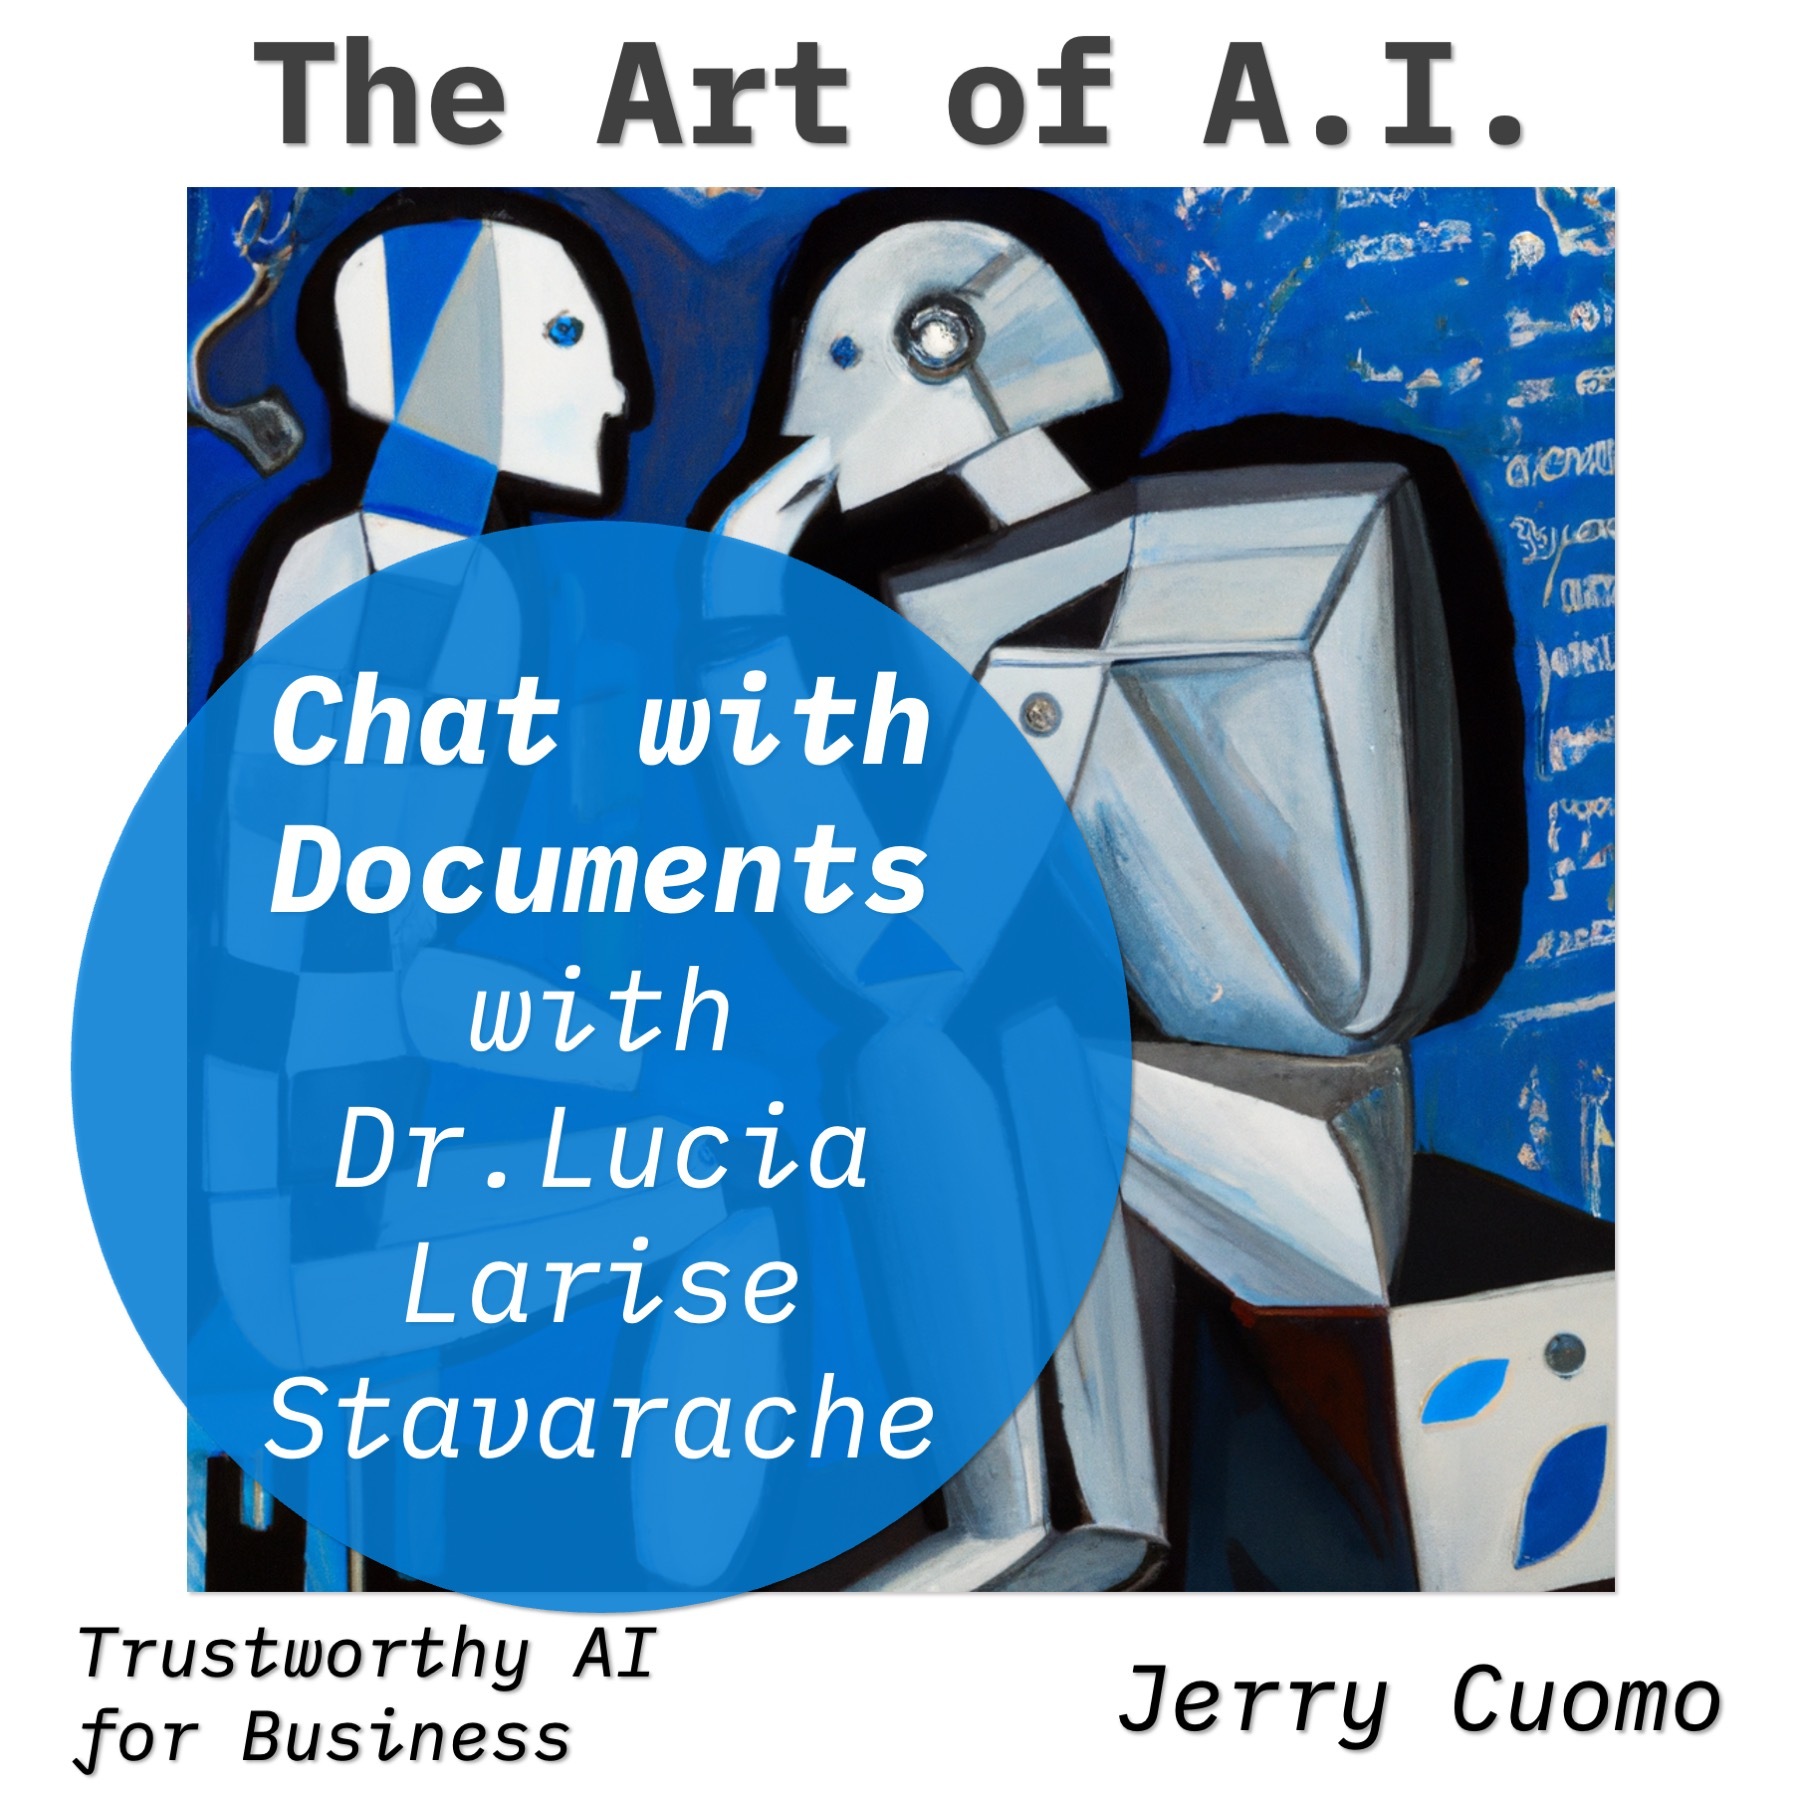 Chat with Documents